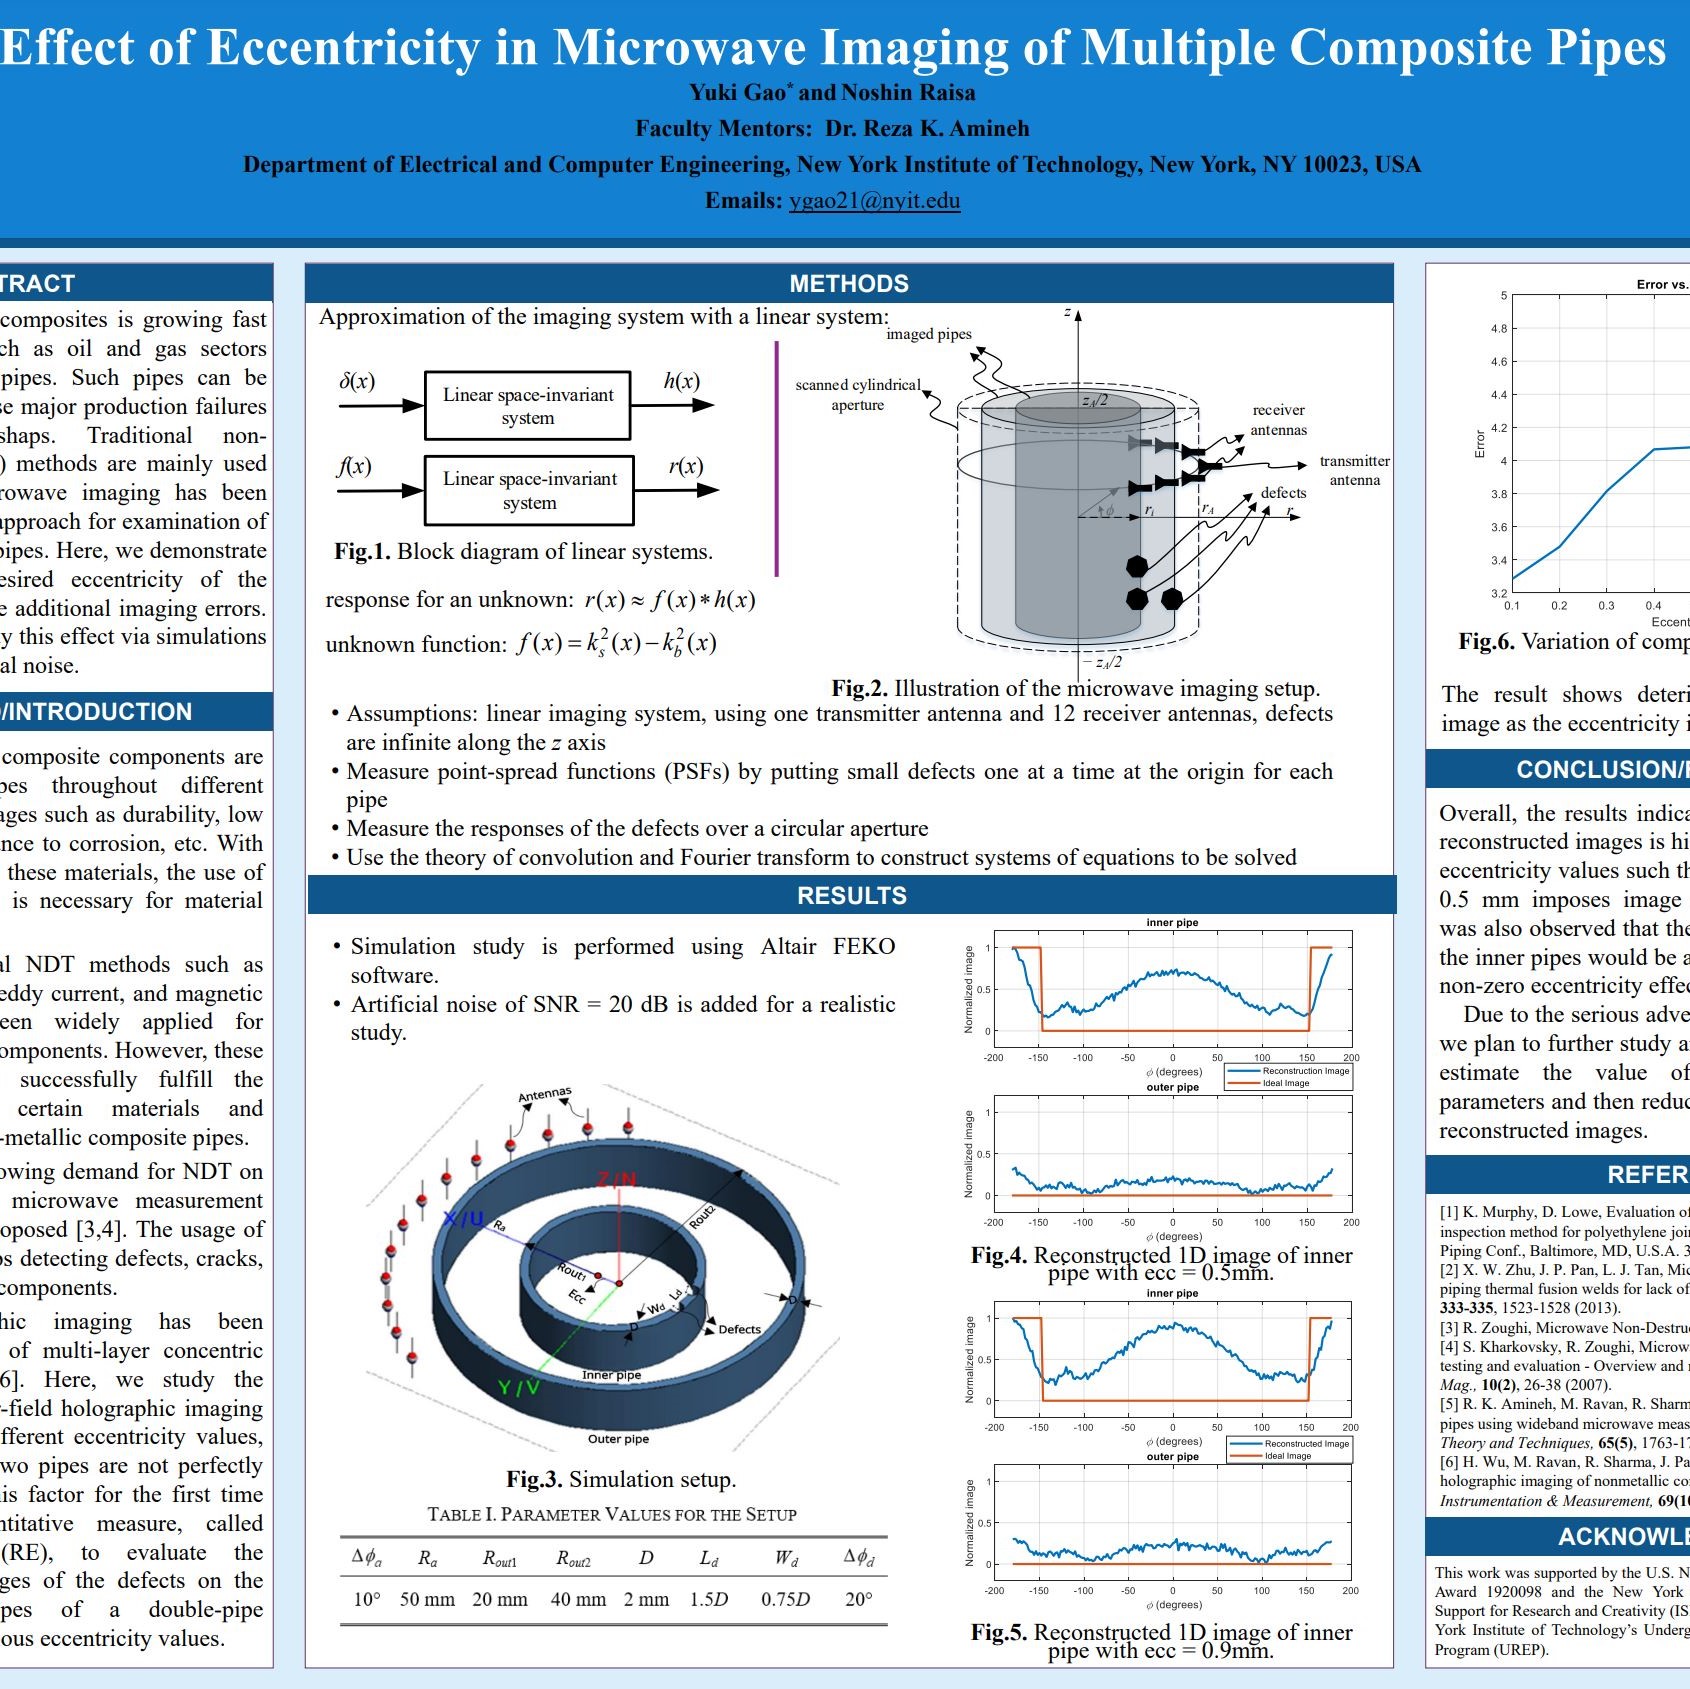 Effect of Eccentricity in Microwave Imaging of Multiple Composite Pipes